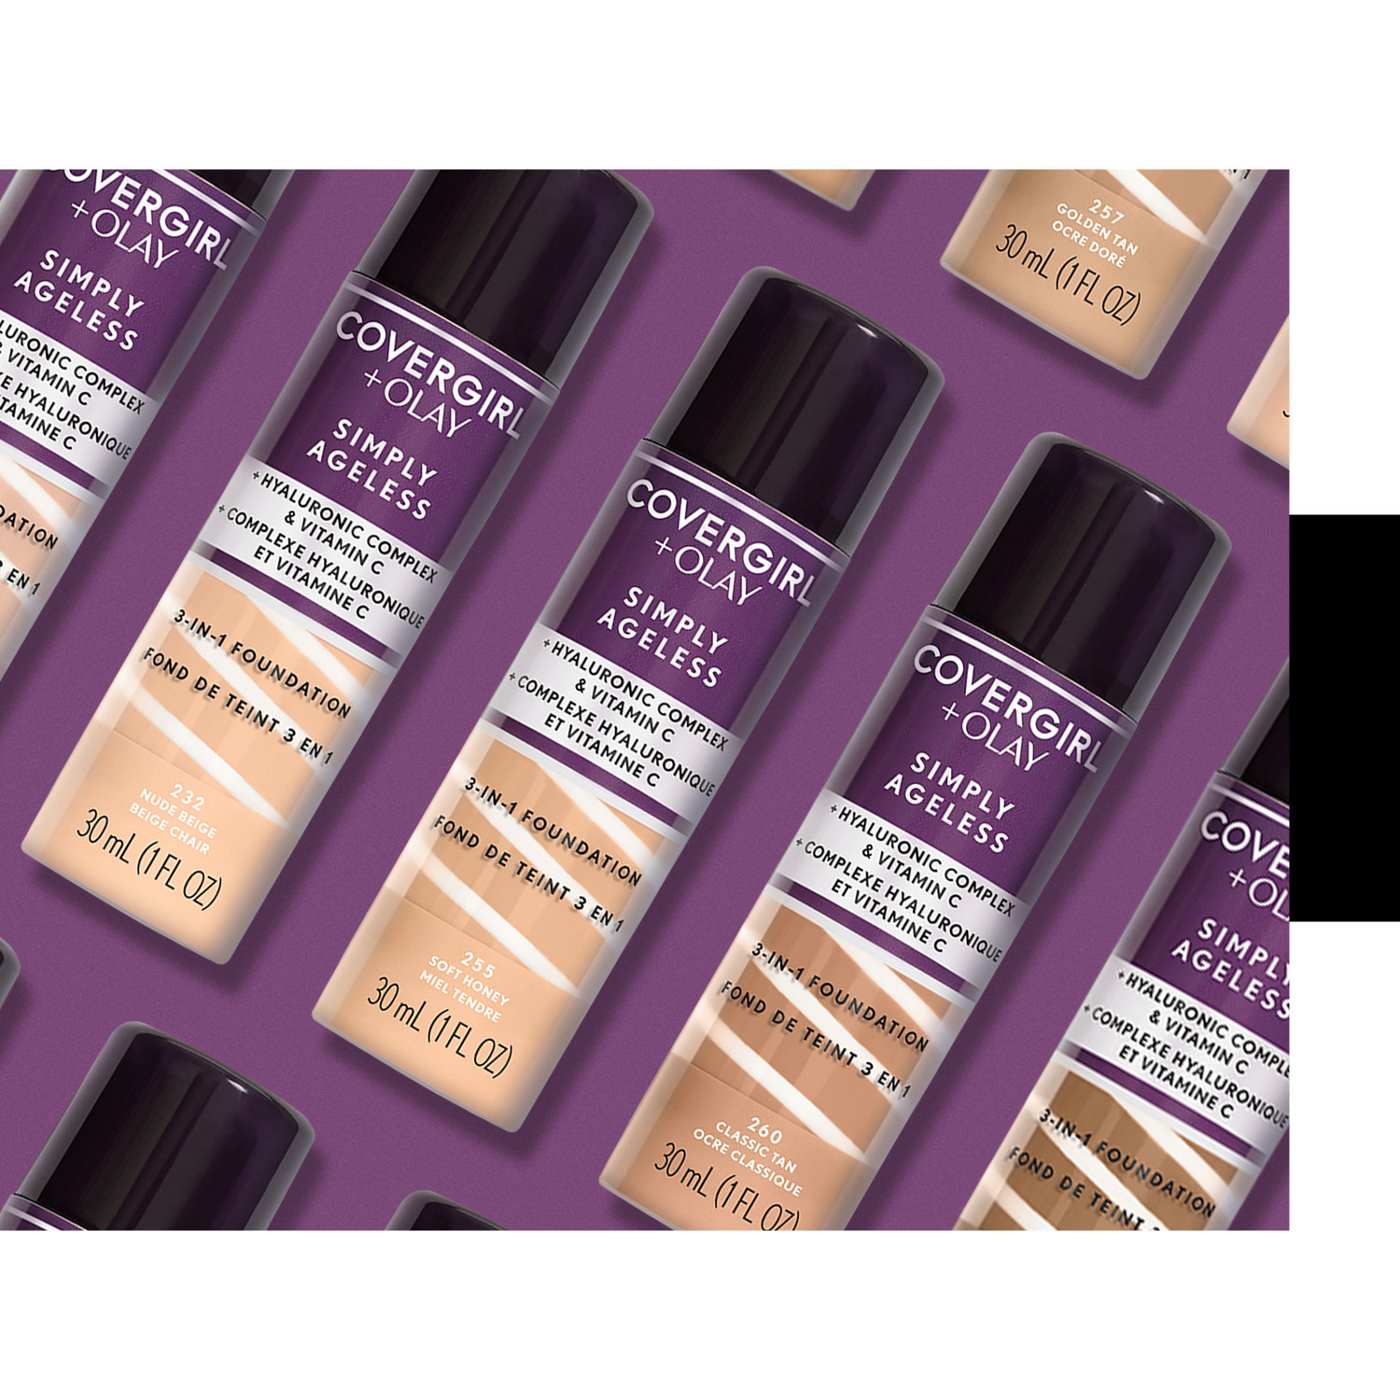 Covergirl Simply Ageless 3-in-1 Liquid Foundation 225 Buff Beige; image 4 of 6